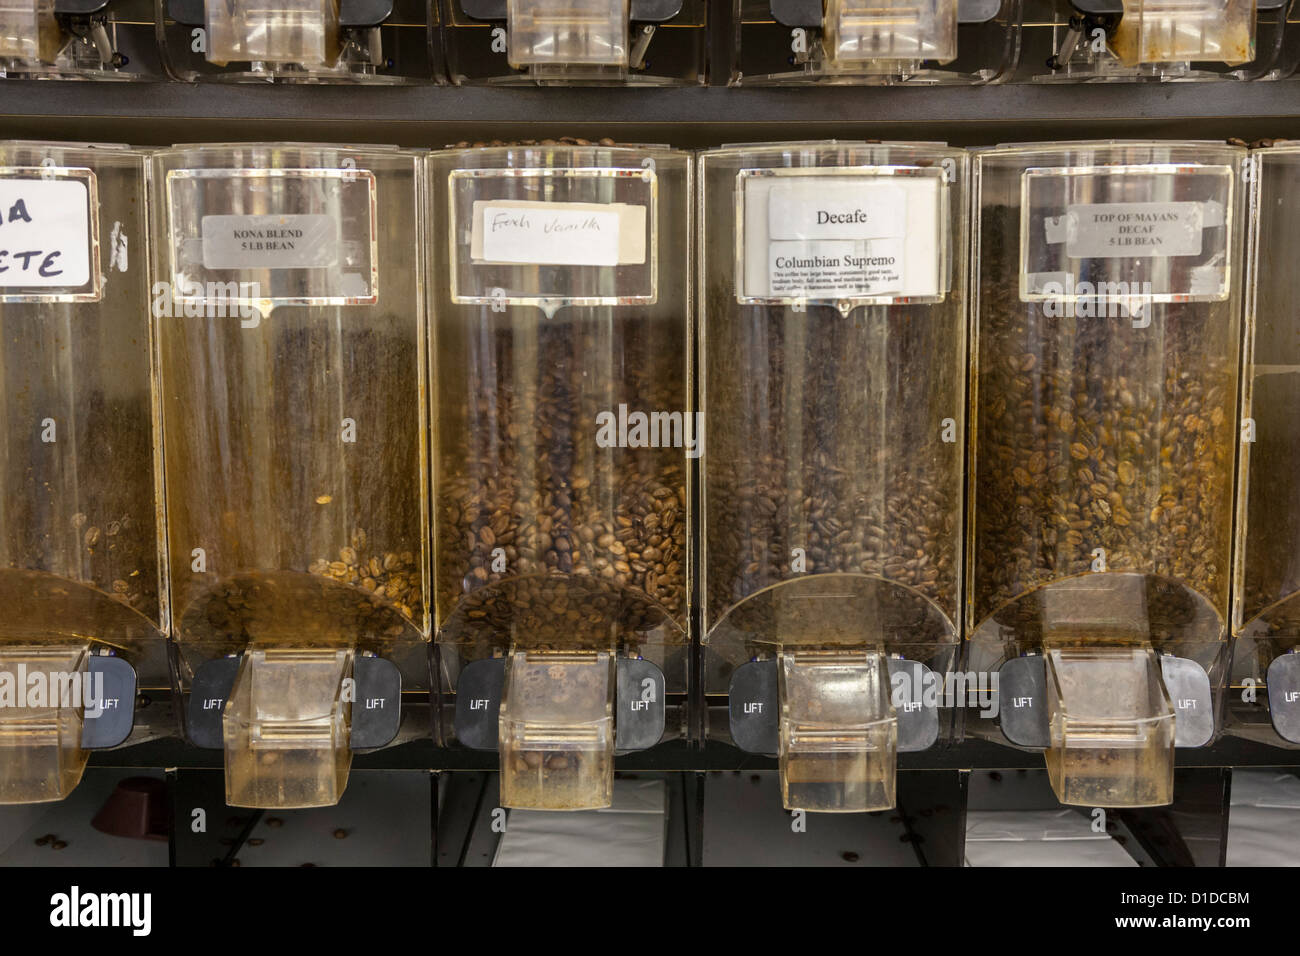 Coffee bean dispenser with several varieties of coffee beans Stock Photo